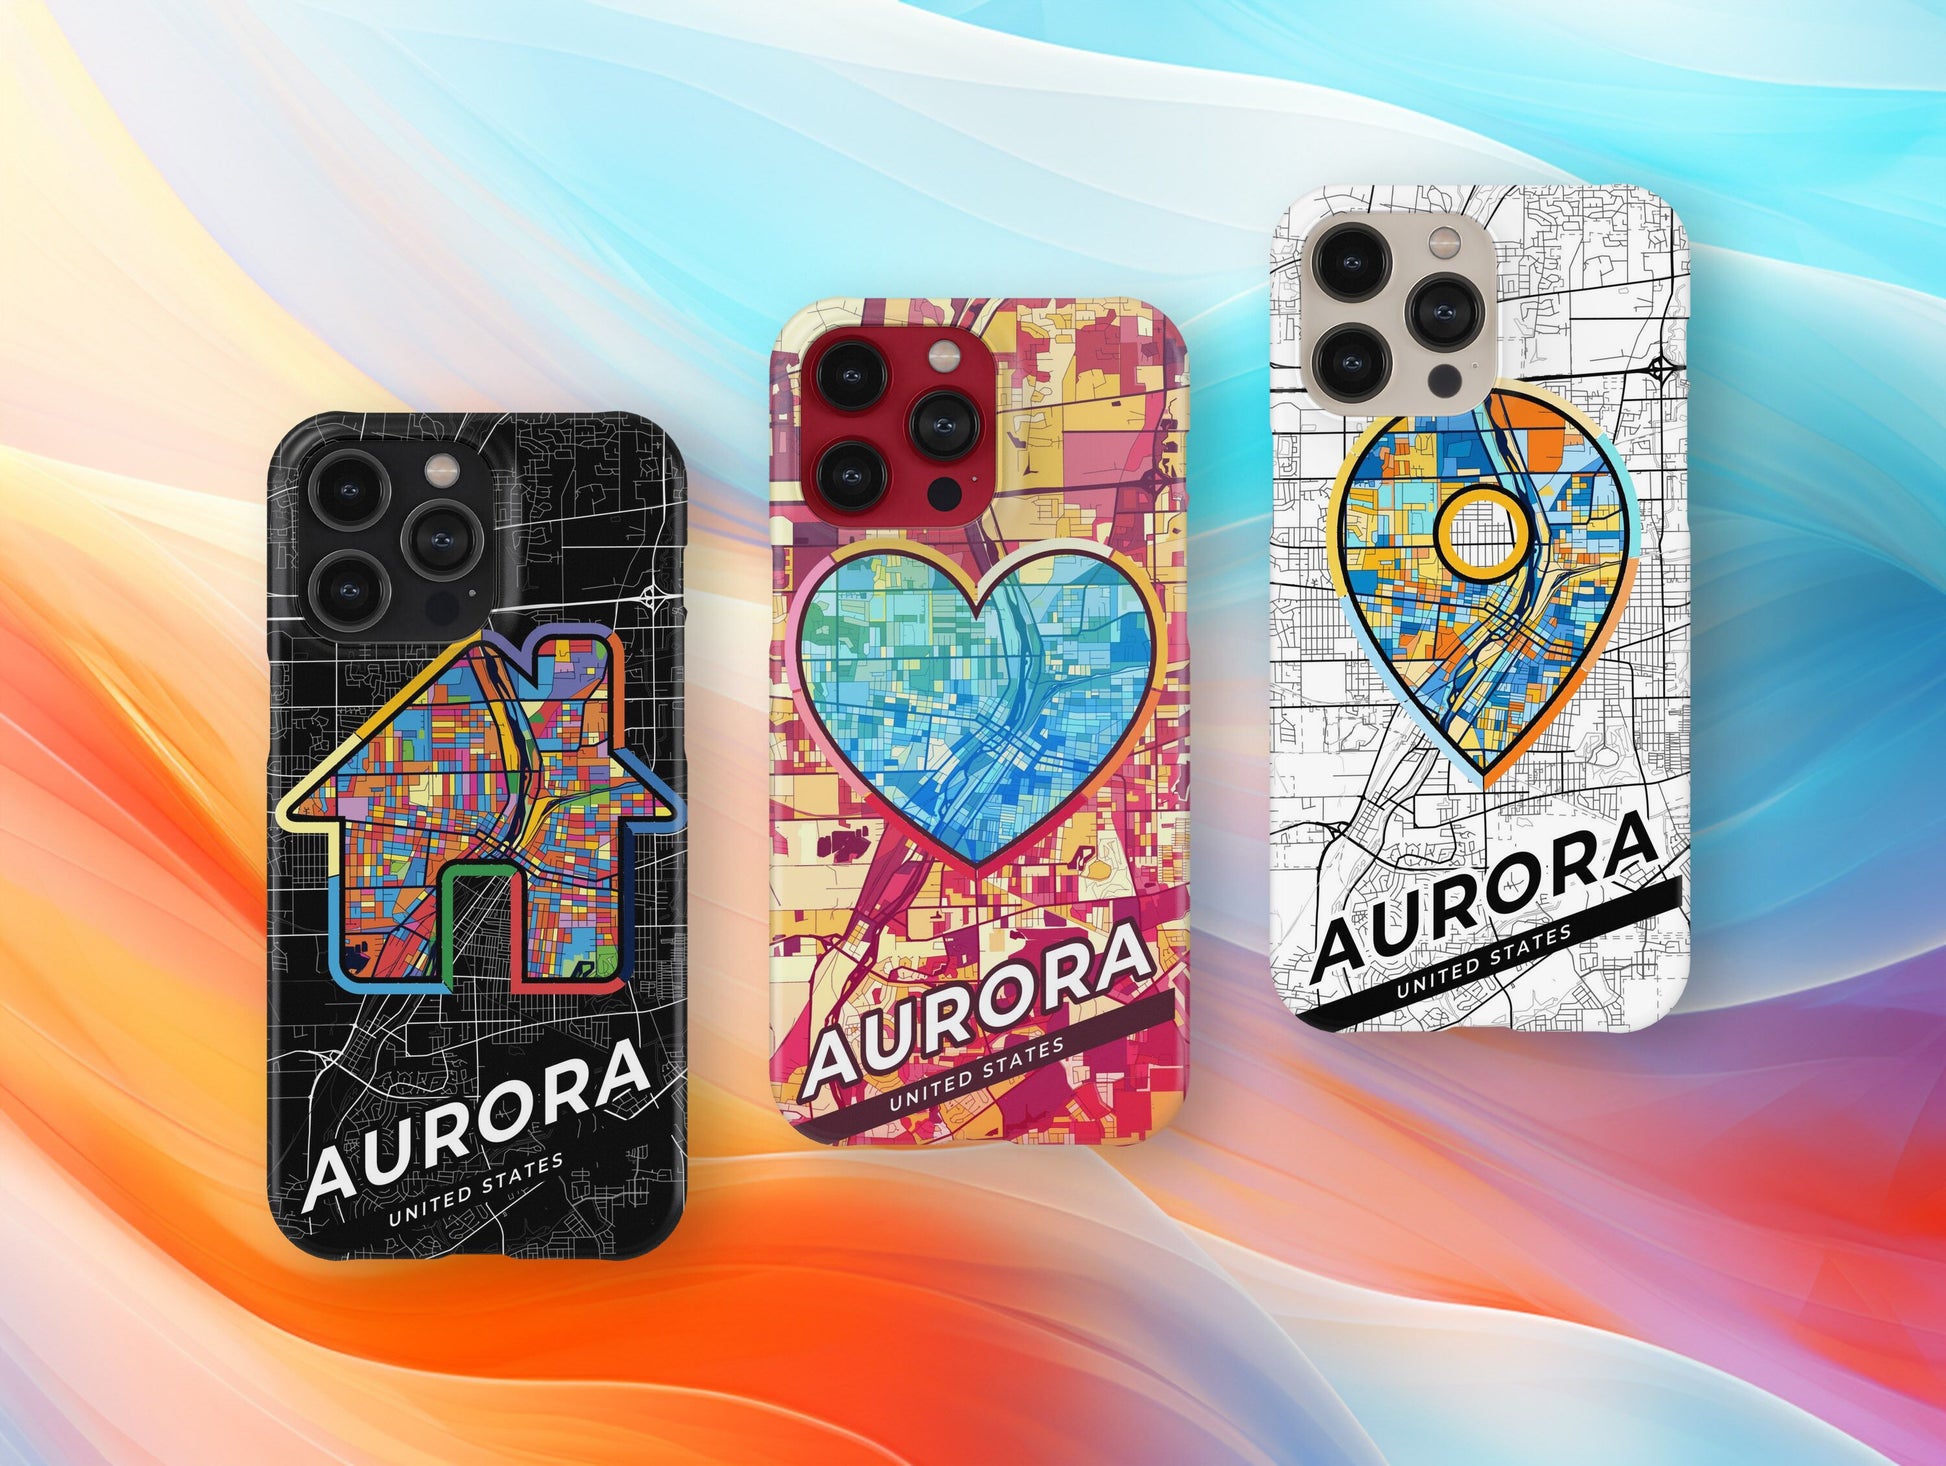 Aurora Illinois slim phone case with colorful icon. Birthday, wedding or housewarming gift. Couple match cases.